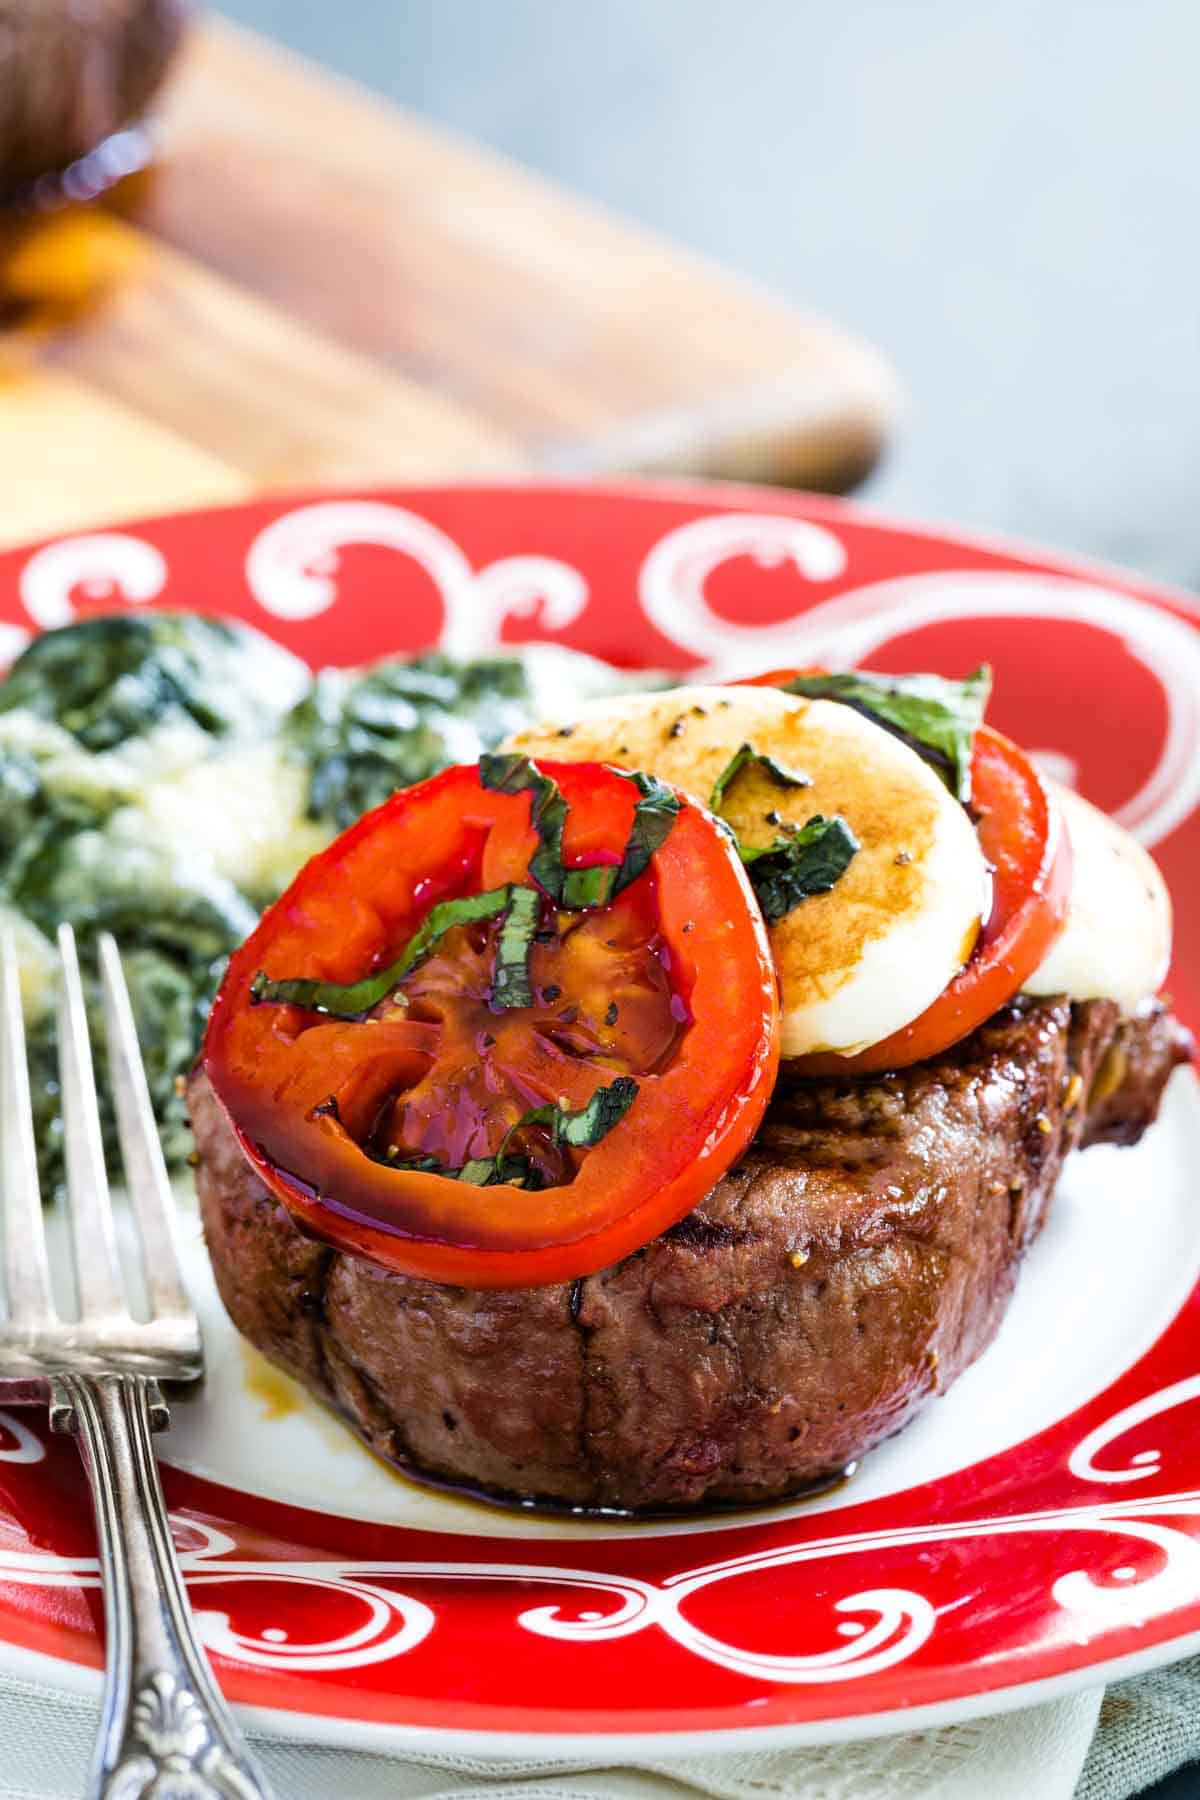 A Caprese steak, topped with basil, tomatoes, and mozzarella slices, is shown on a red and white plate with a fork to its left.